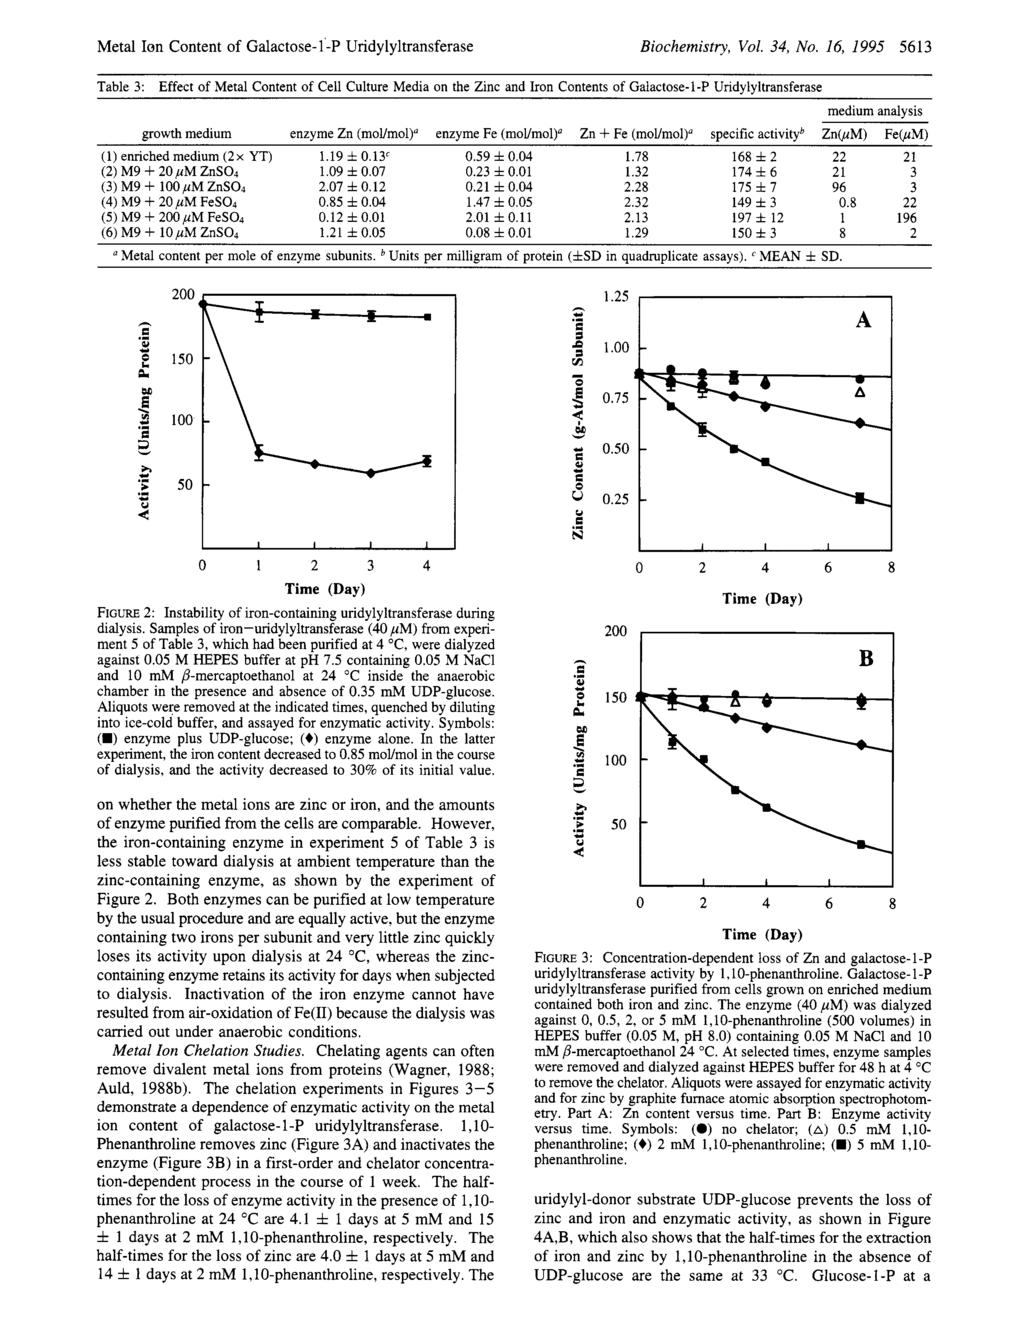 Metal Ion Content of Galactose- 1 -P ridylyltransferase Biocemistry, Vol. 34, No.